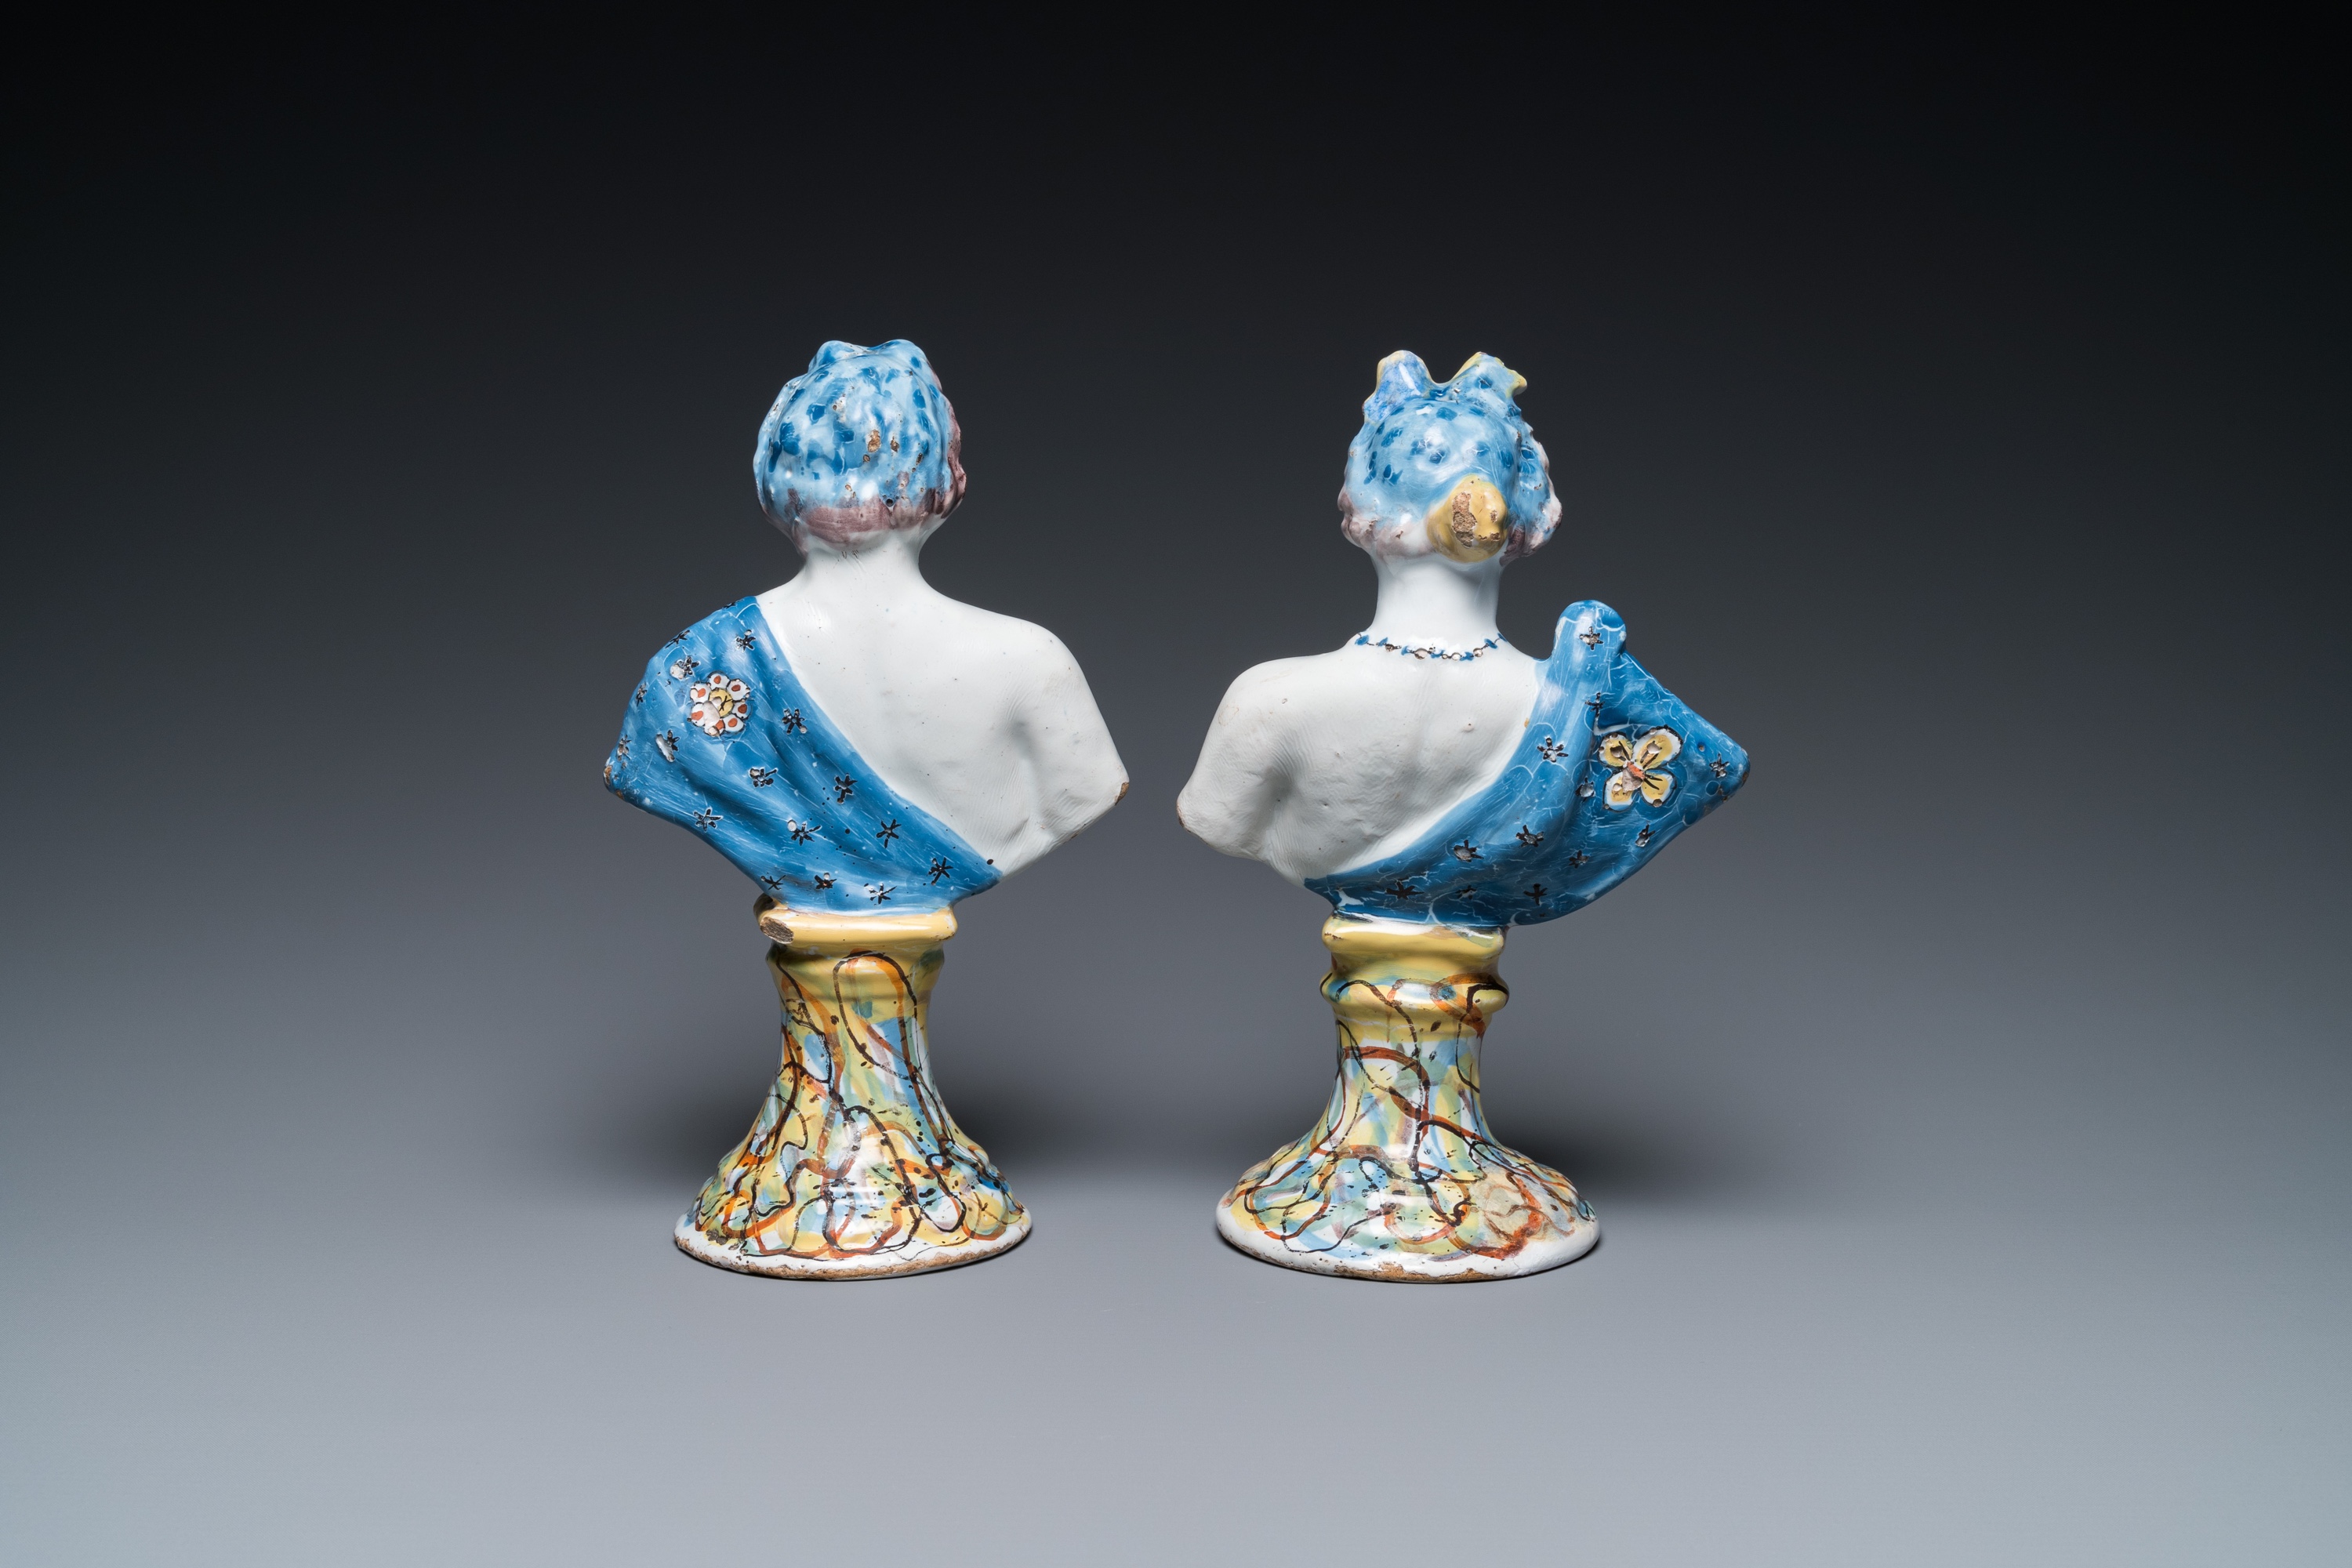 A pair of polychrome Dutch Delft busts on bases imitating marble, 18th C. - Image 4 of 7